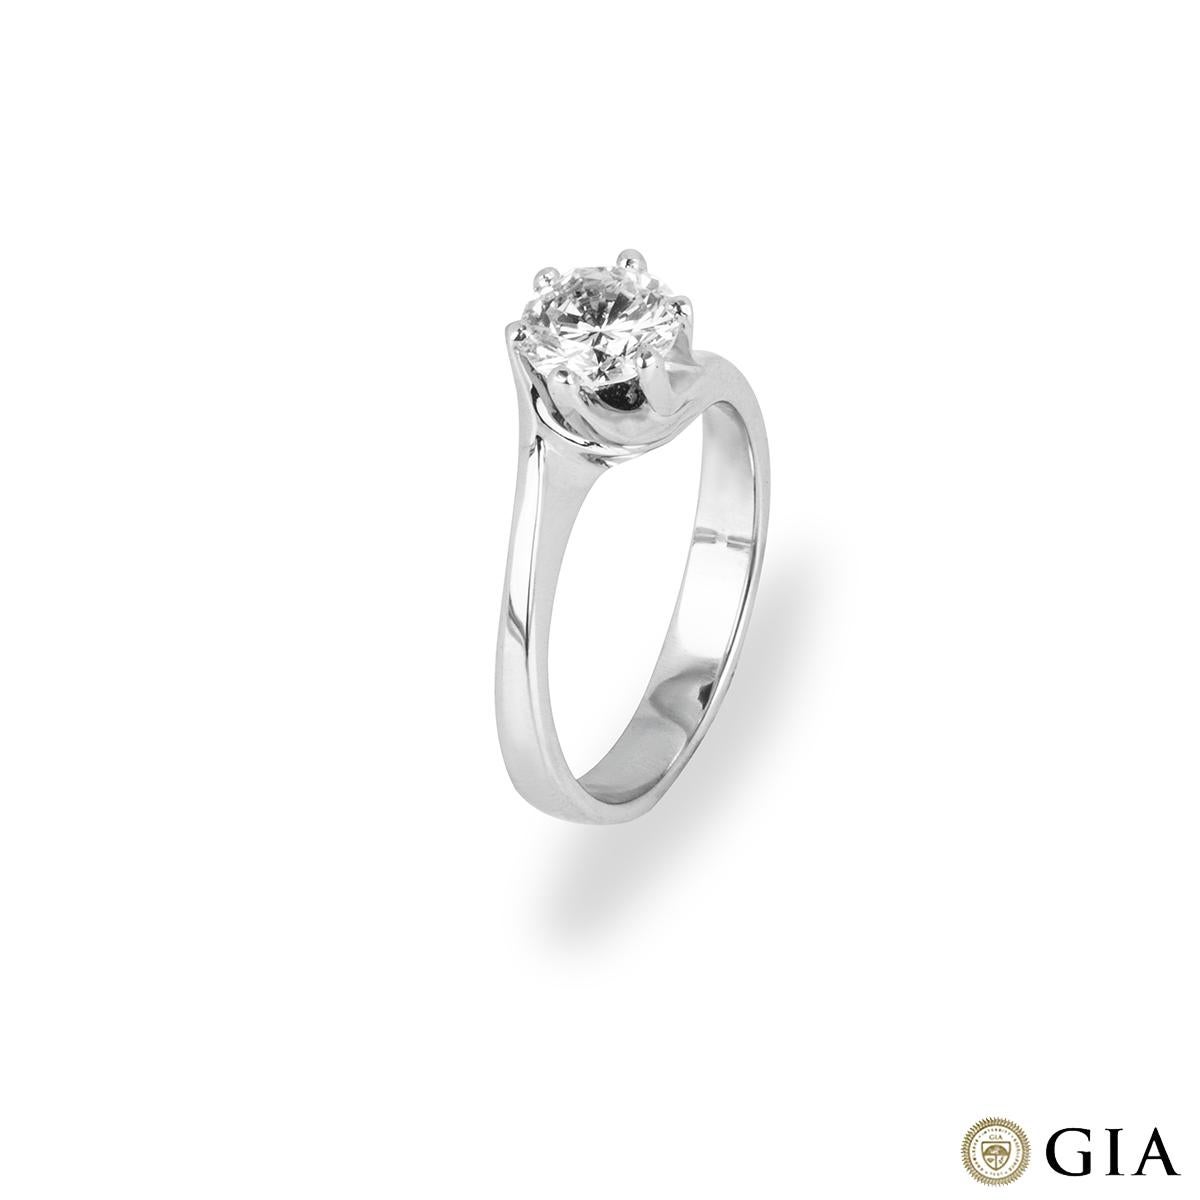 Contemporary GIA Cert White Gold Round Brilliant Cut Diamond Engagement Ring 1.07ct J/SI1 For Sale